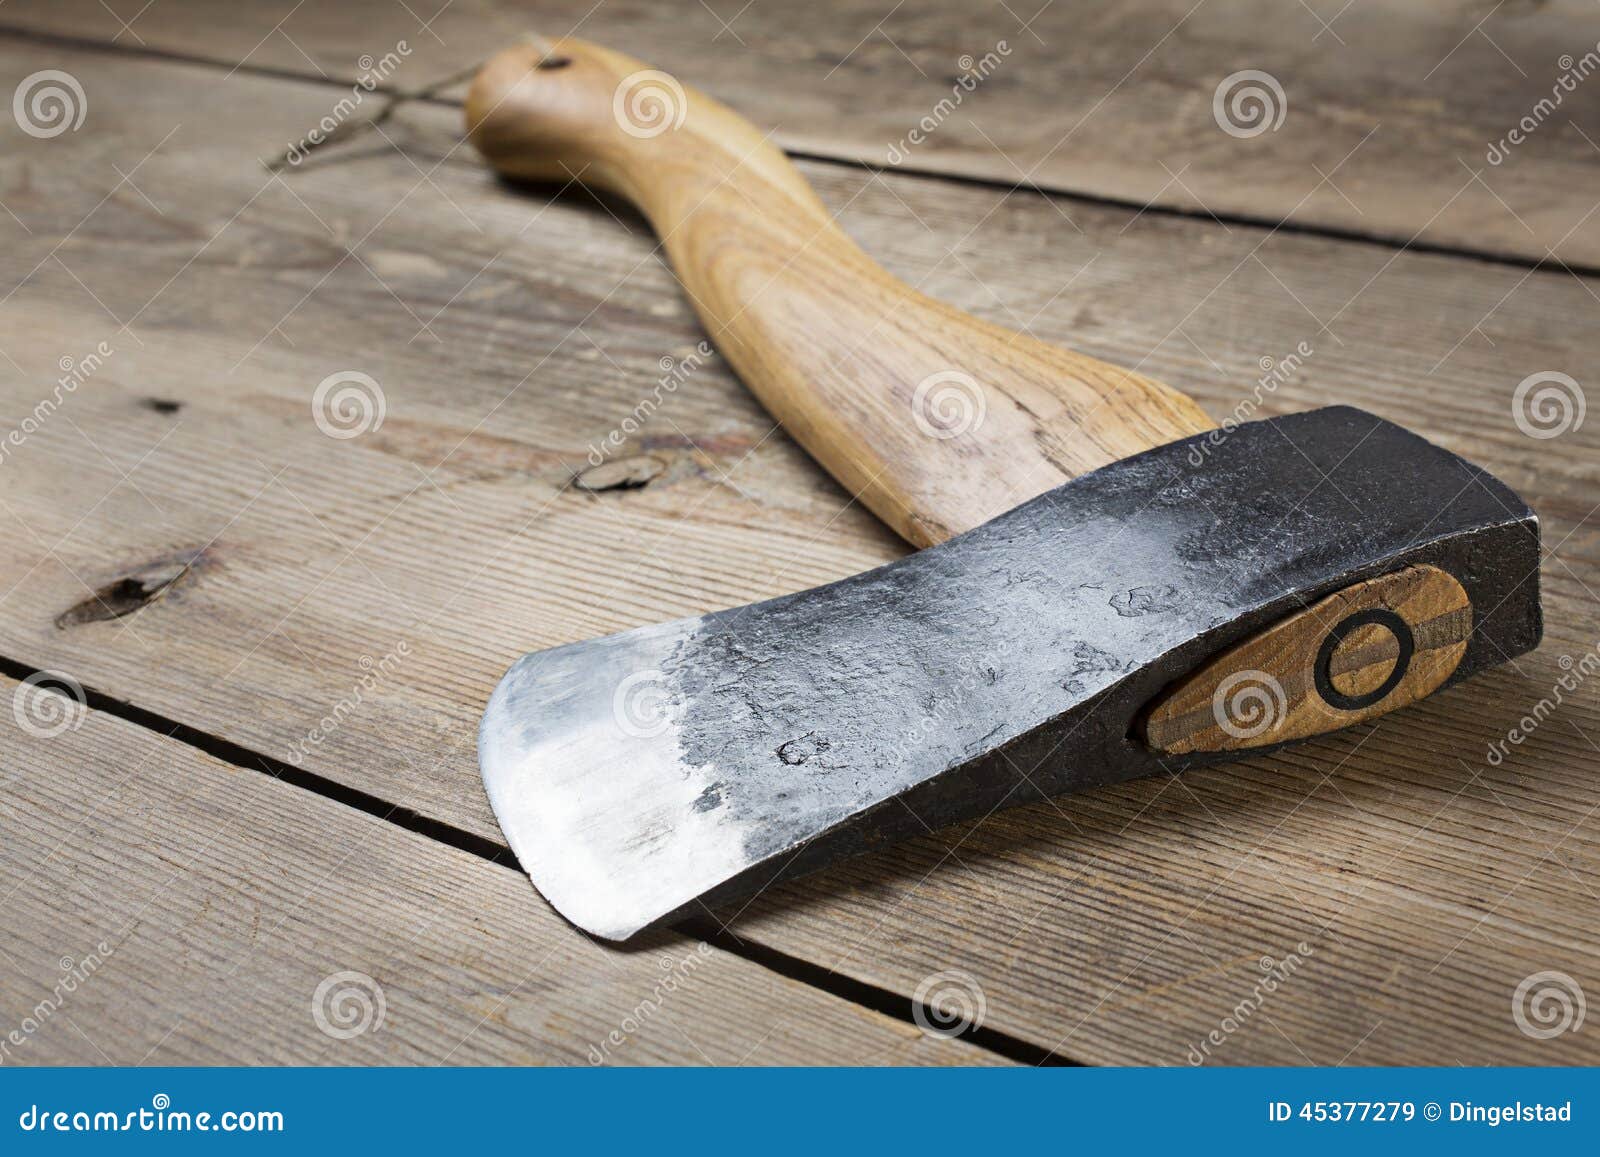 Citizenship pay Registration Axe lying on table stock image. Image of block, country - 45377279